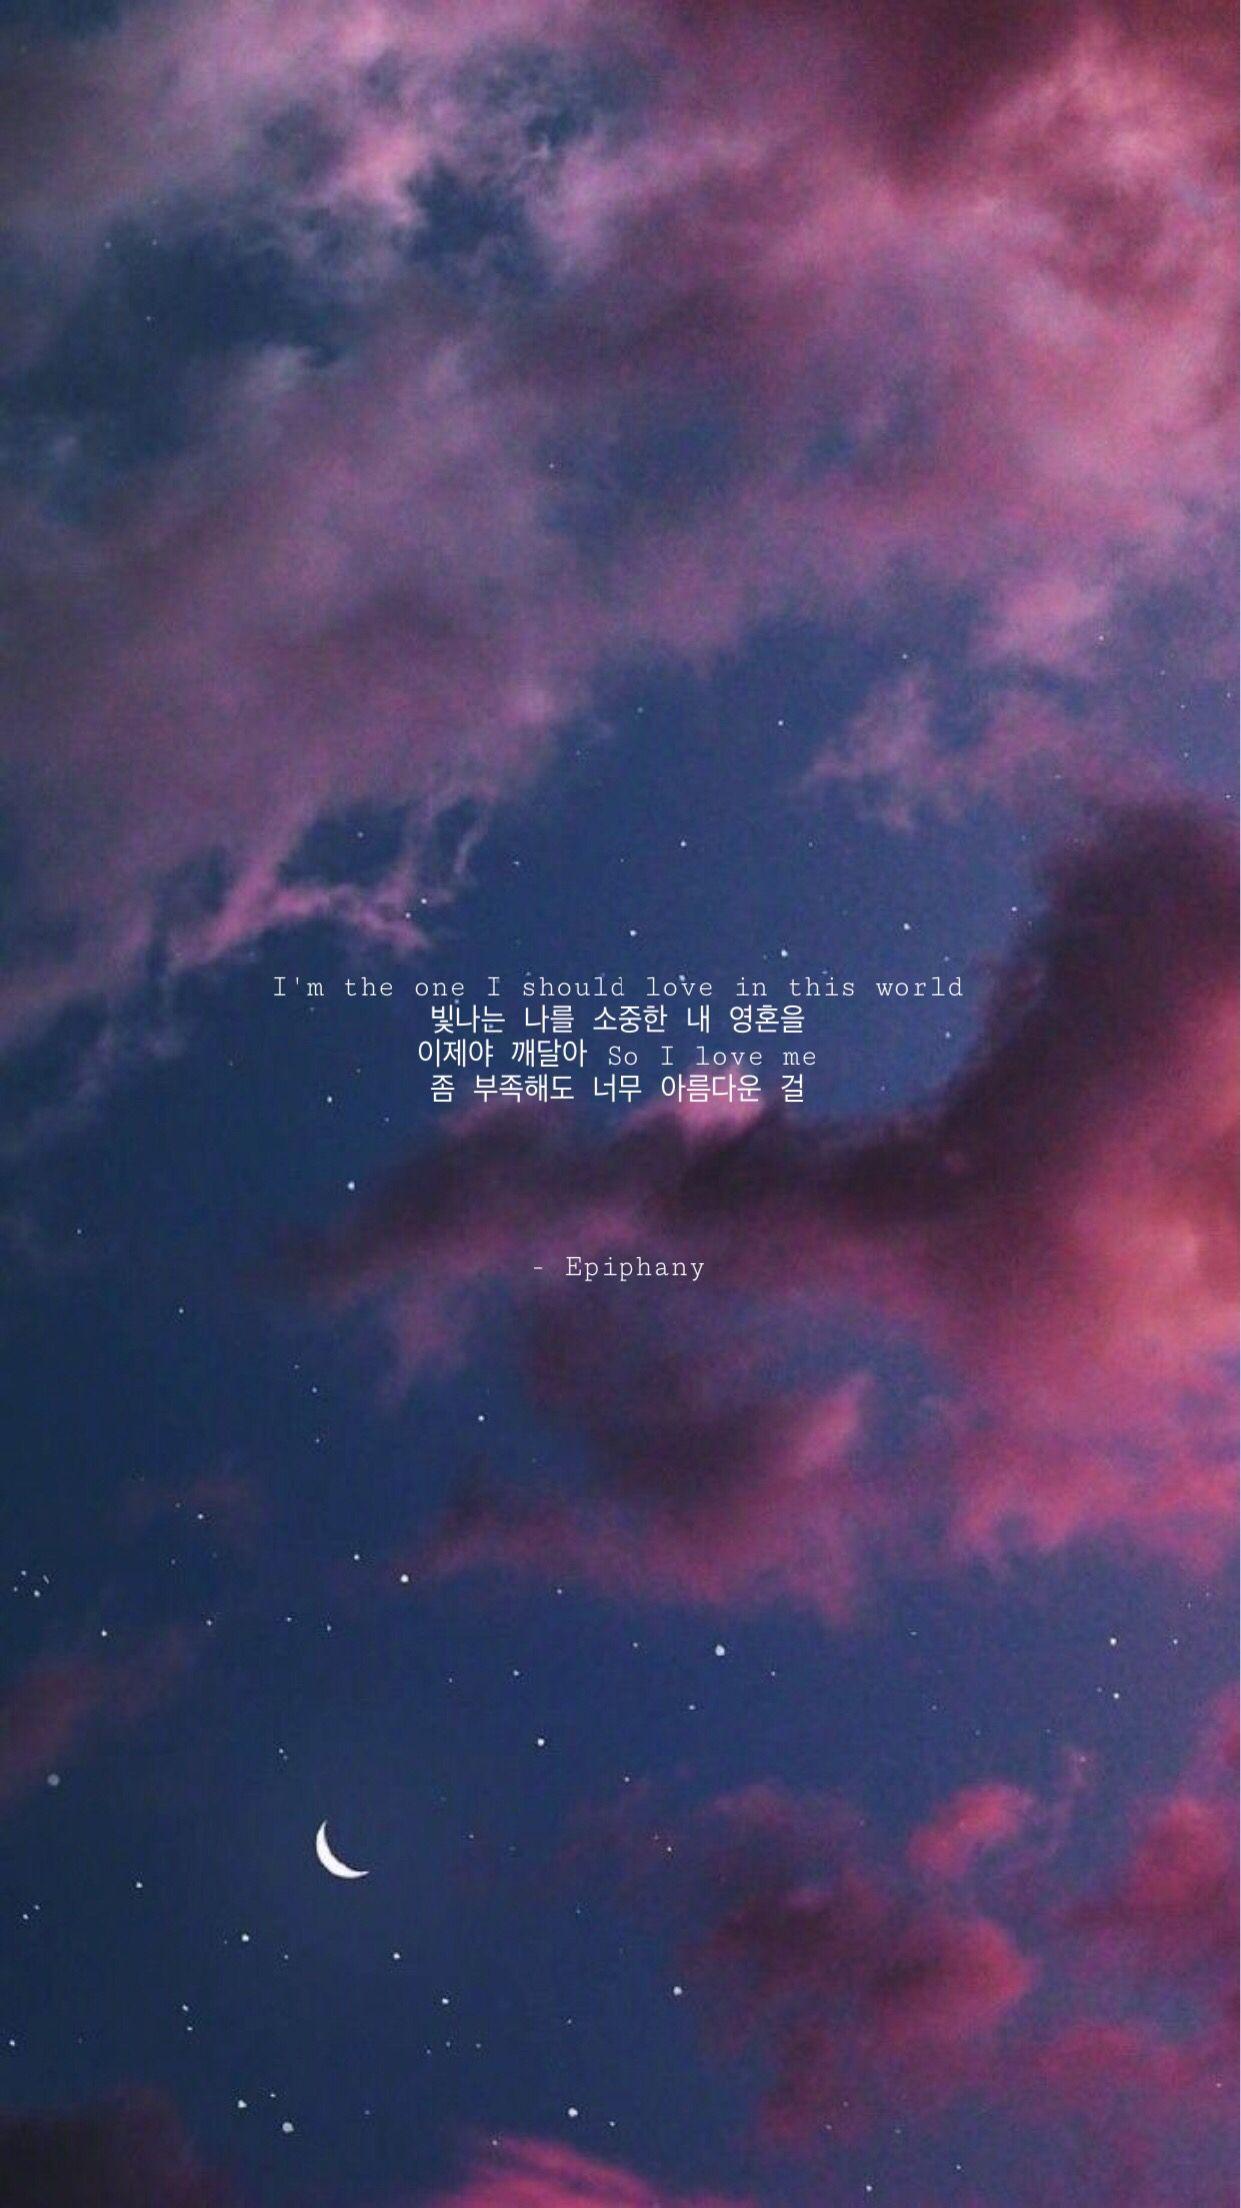 BTS Lyric Quotes Wallpapers - Top Free BTS Lyric Quotes Backgrounds ...